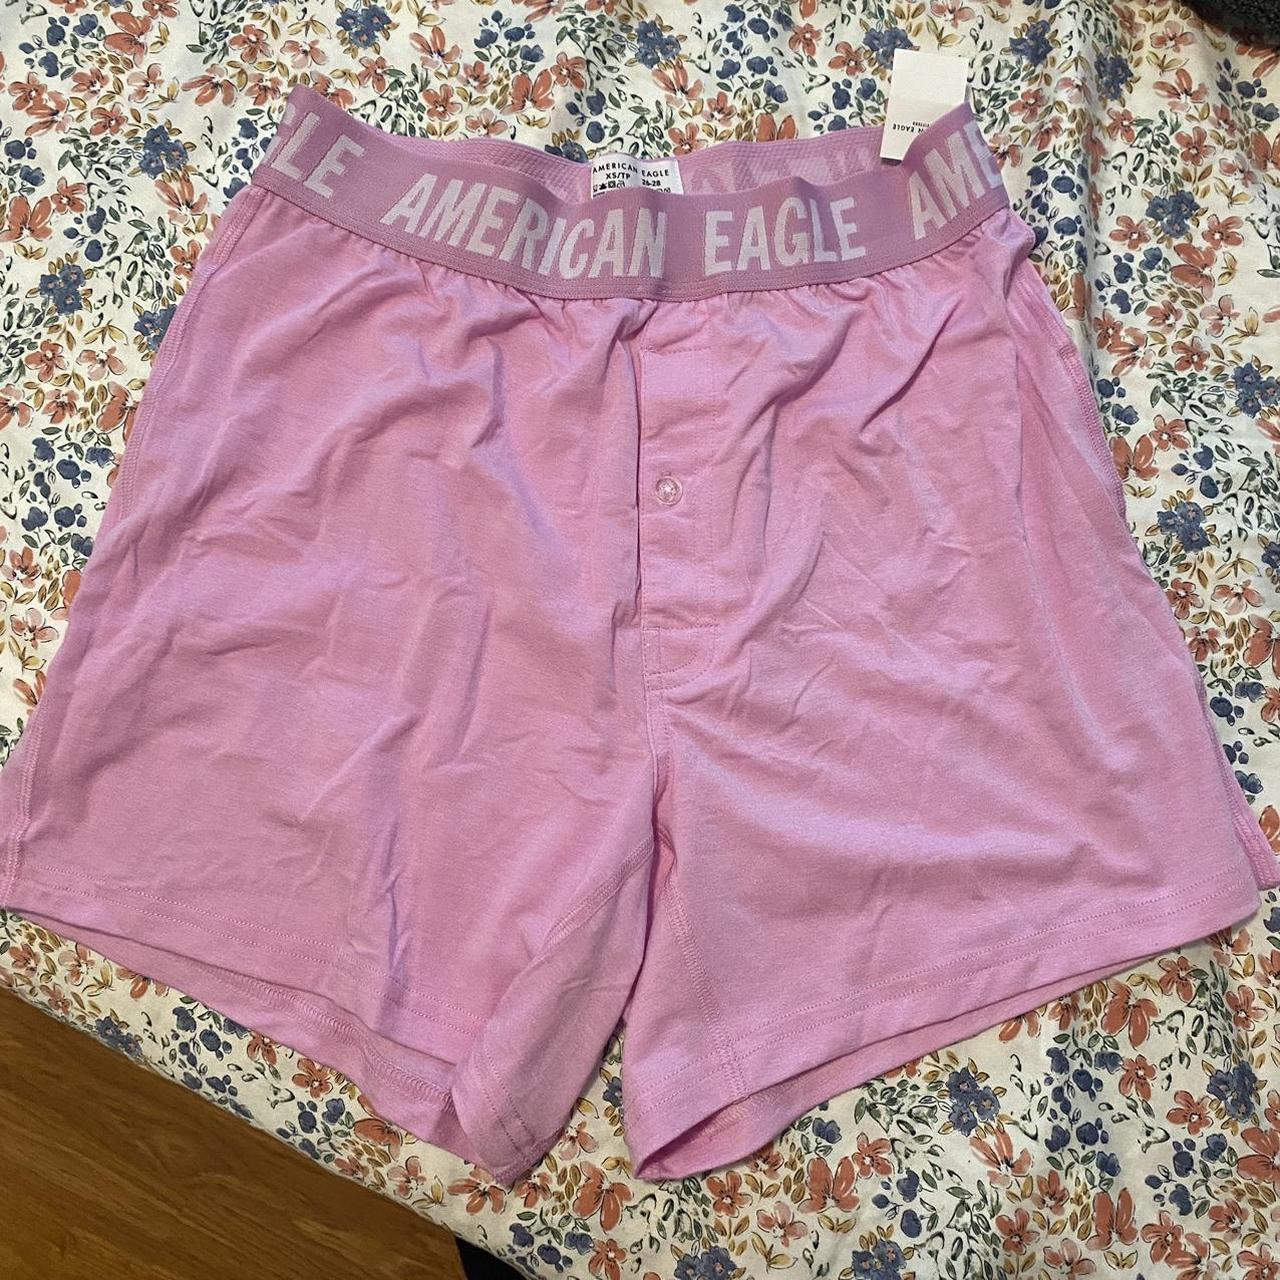 american eagle pink boxers NWT size xs #boxers #ae - Depop